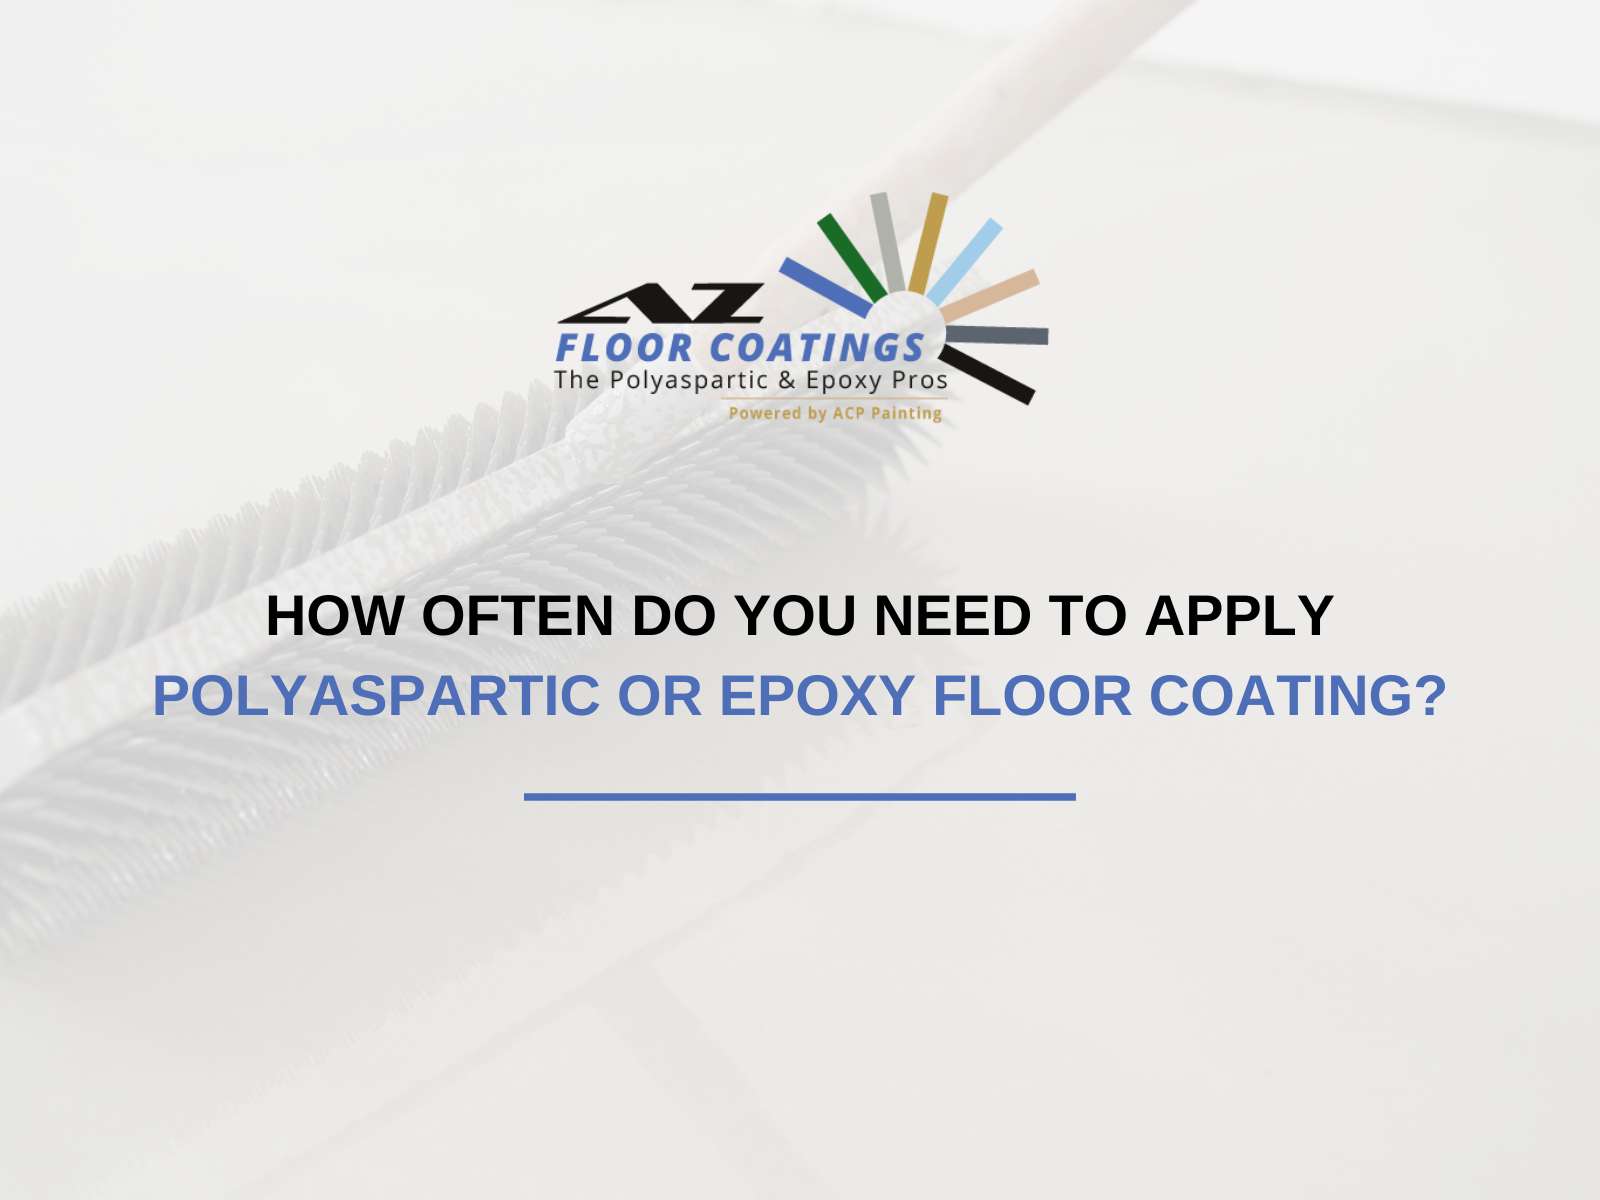 How Often Do You Need To Apply Polyaspartic Or Epoxy Floor Coating